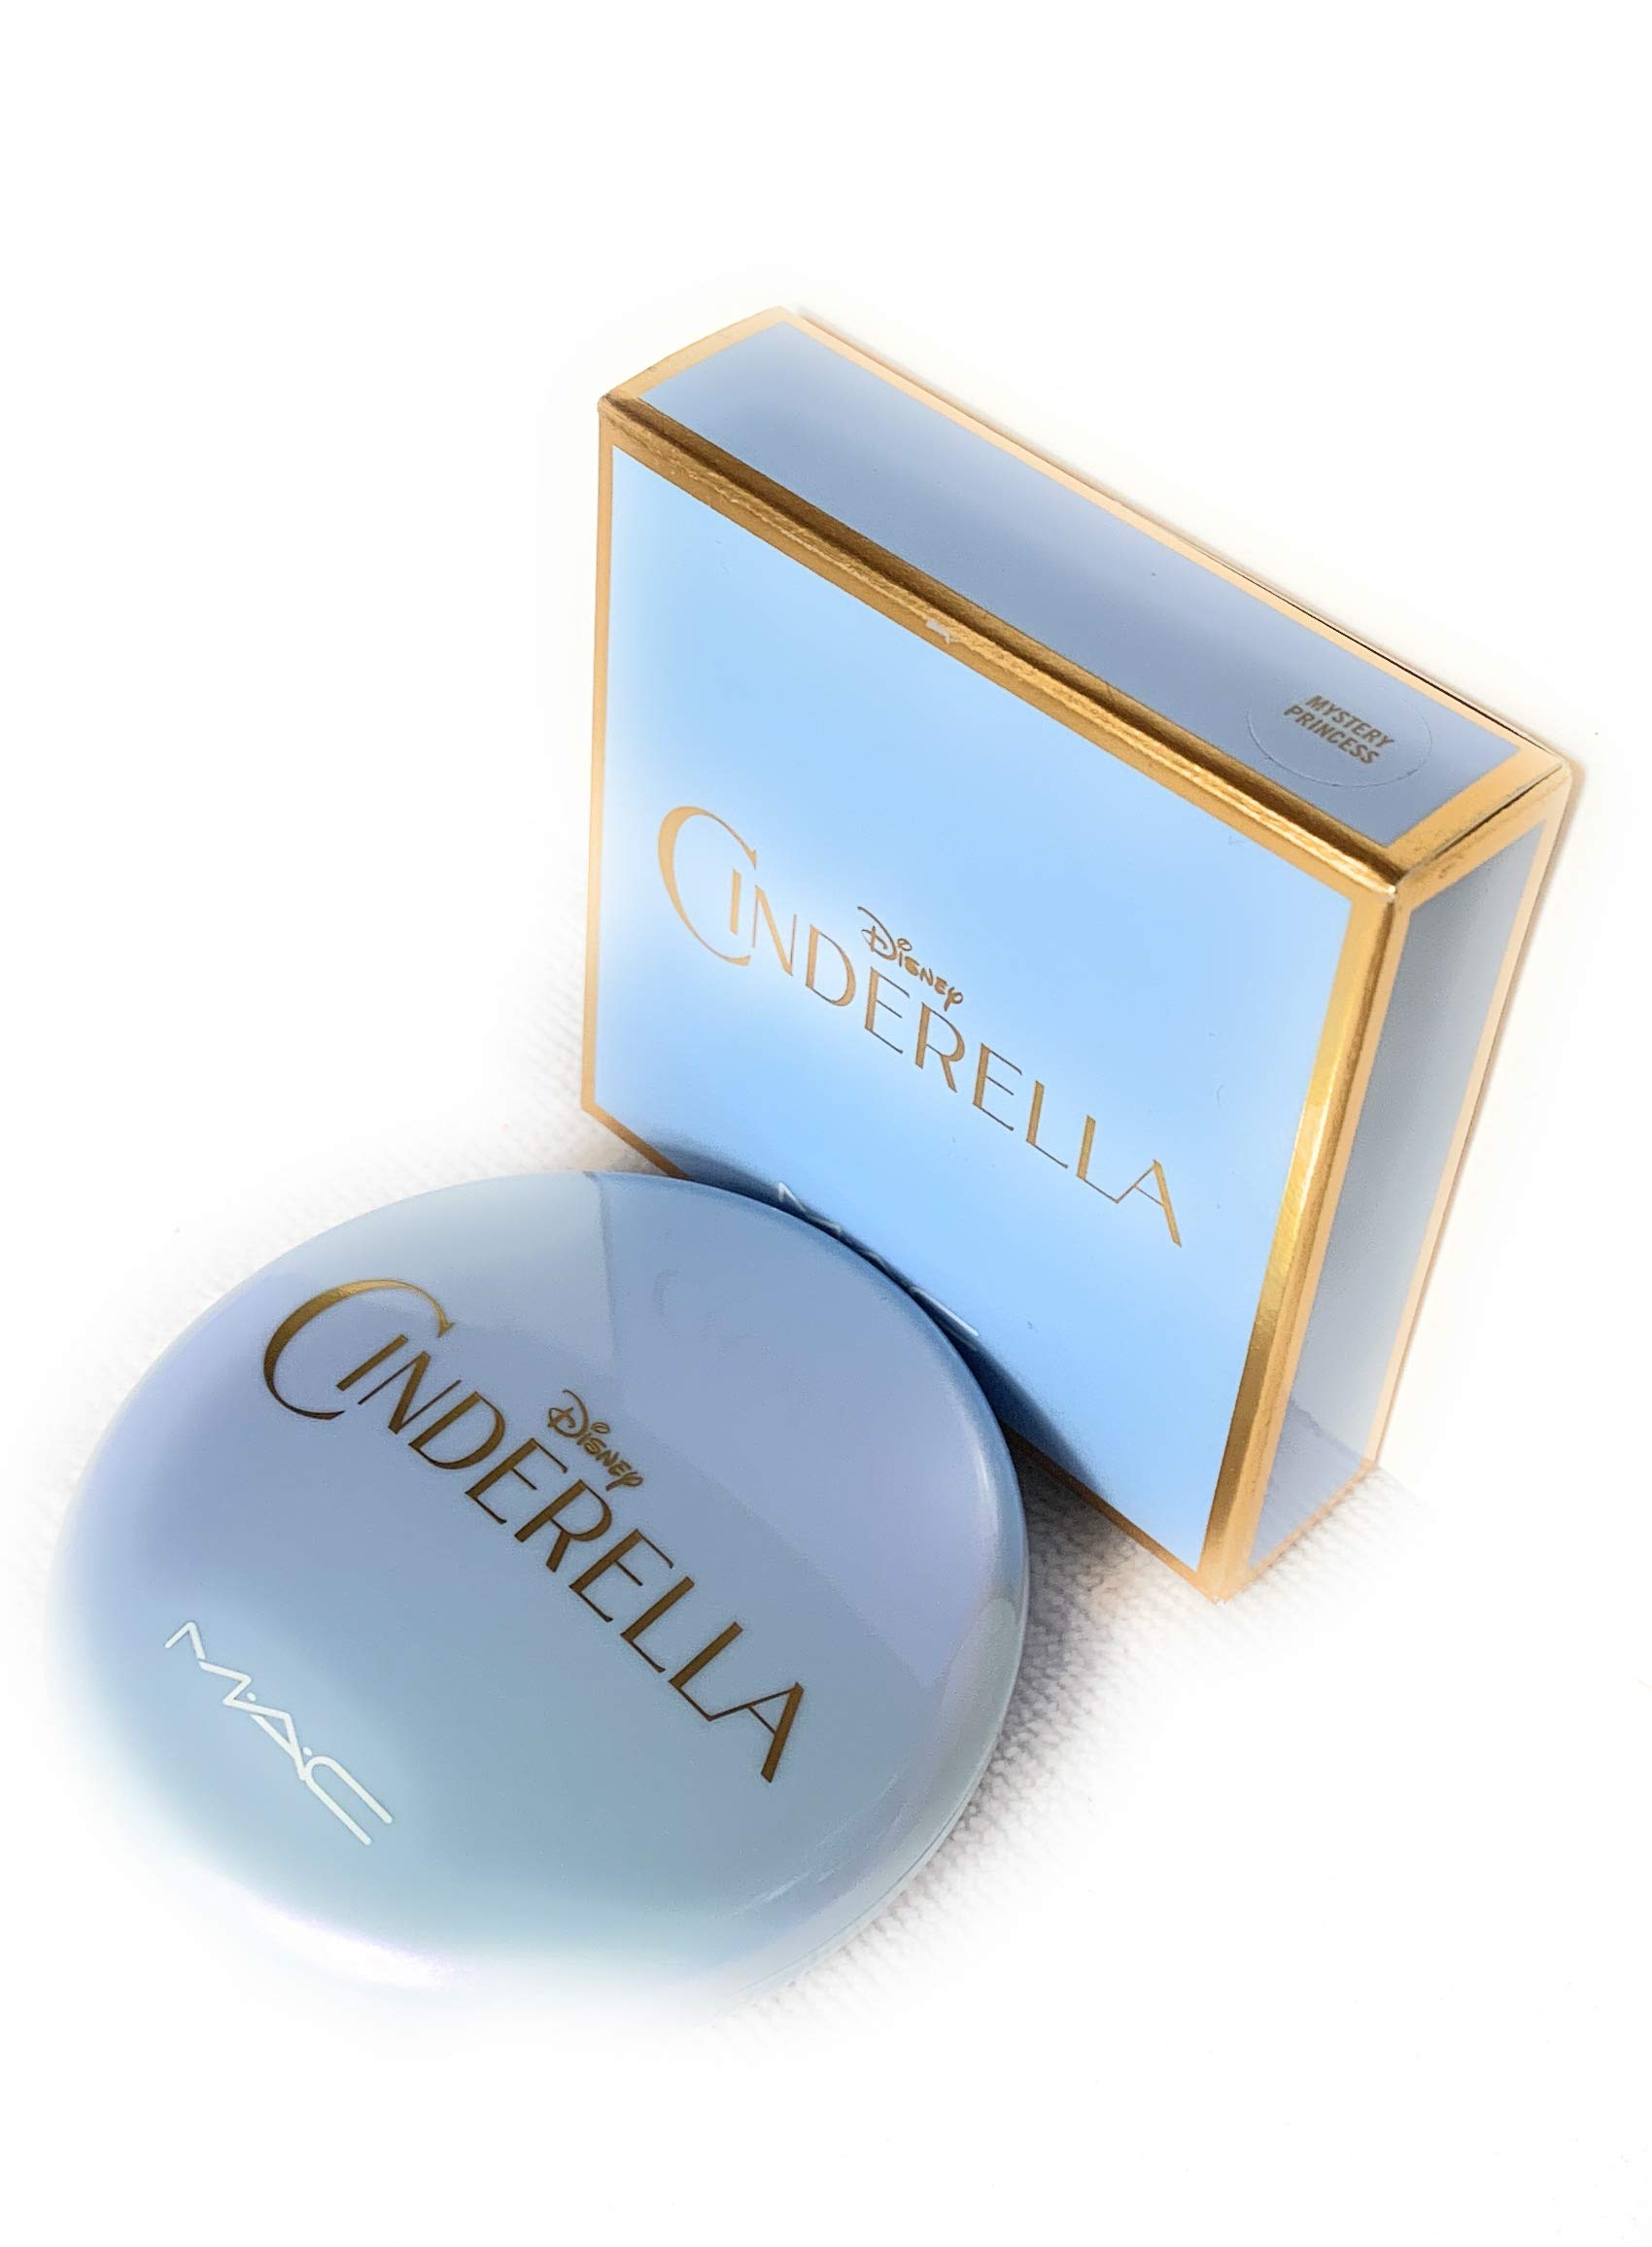 MAC Limited Edition Cinderella Collection Beauty Powder - Mystery Princess